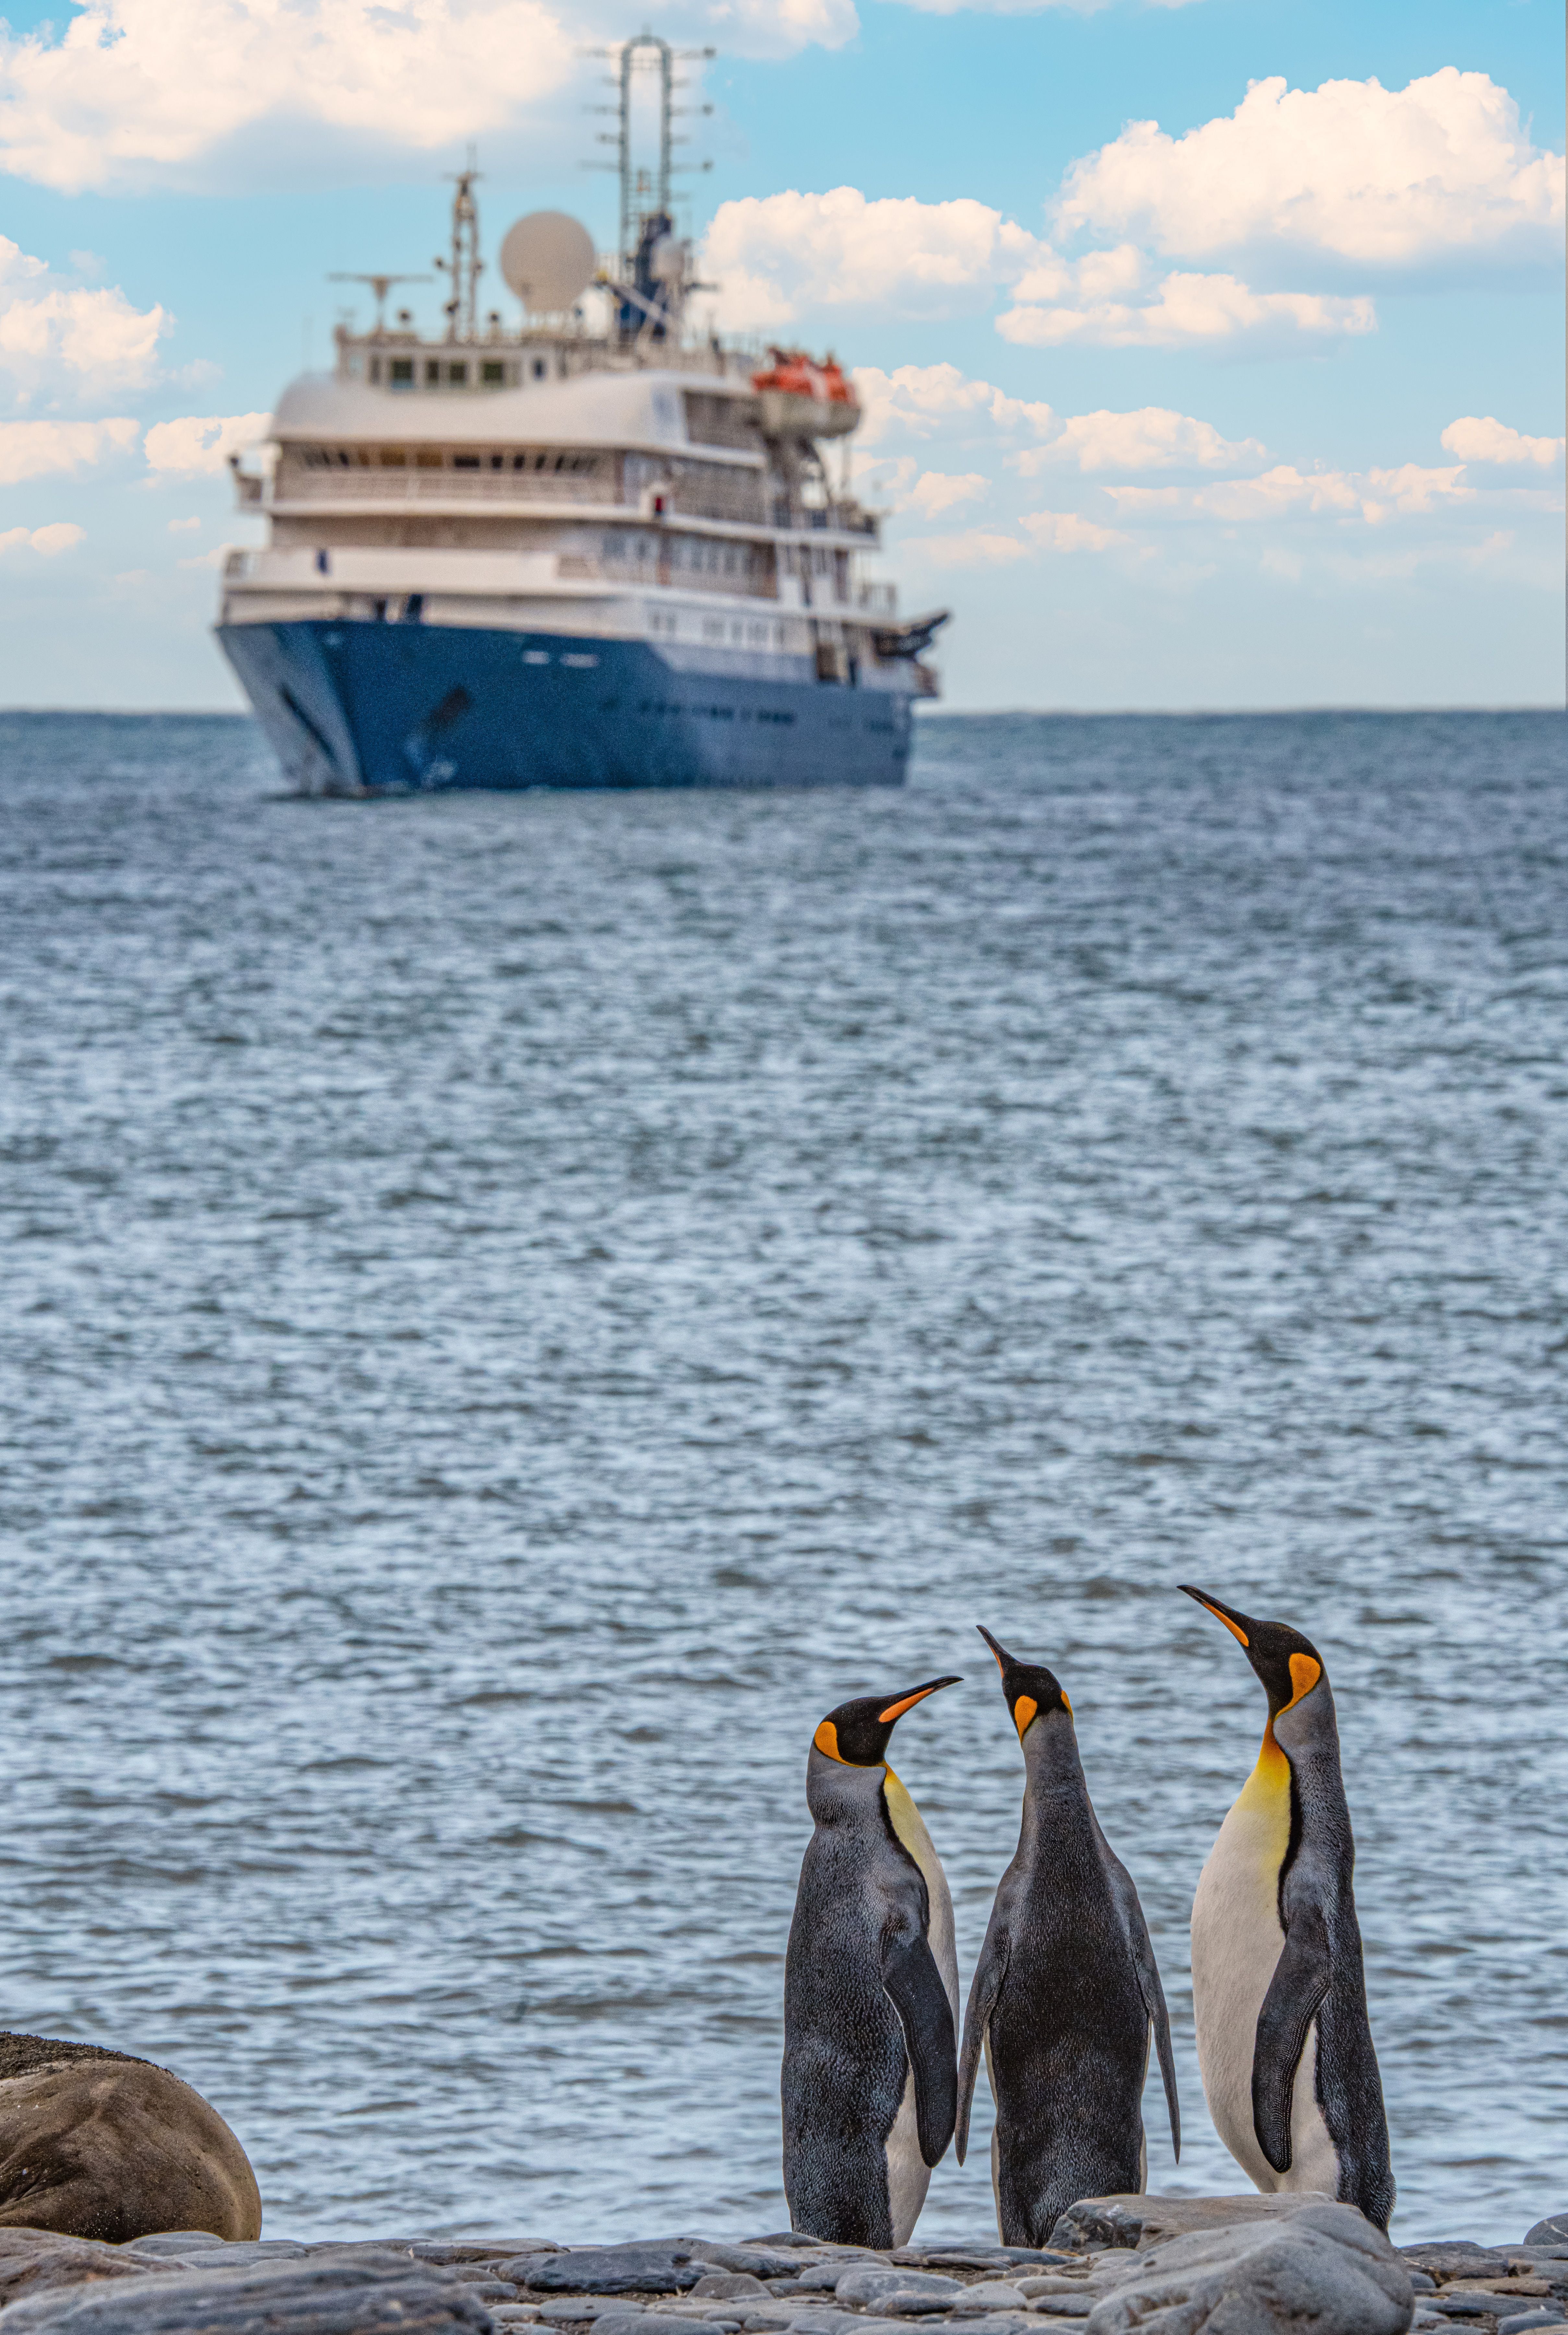 a group of king penguins (APTENODYTES PATAGONICUS) standing on the beach in South Georgia with an Antarctic expedition ship in the background